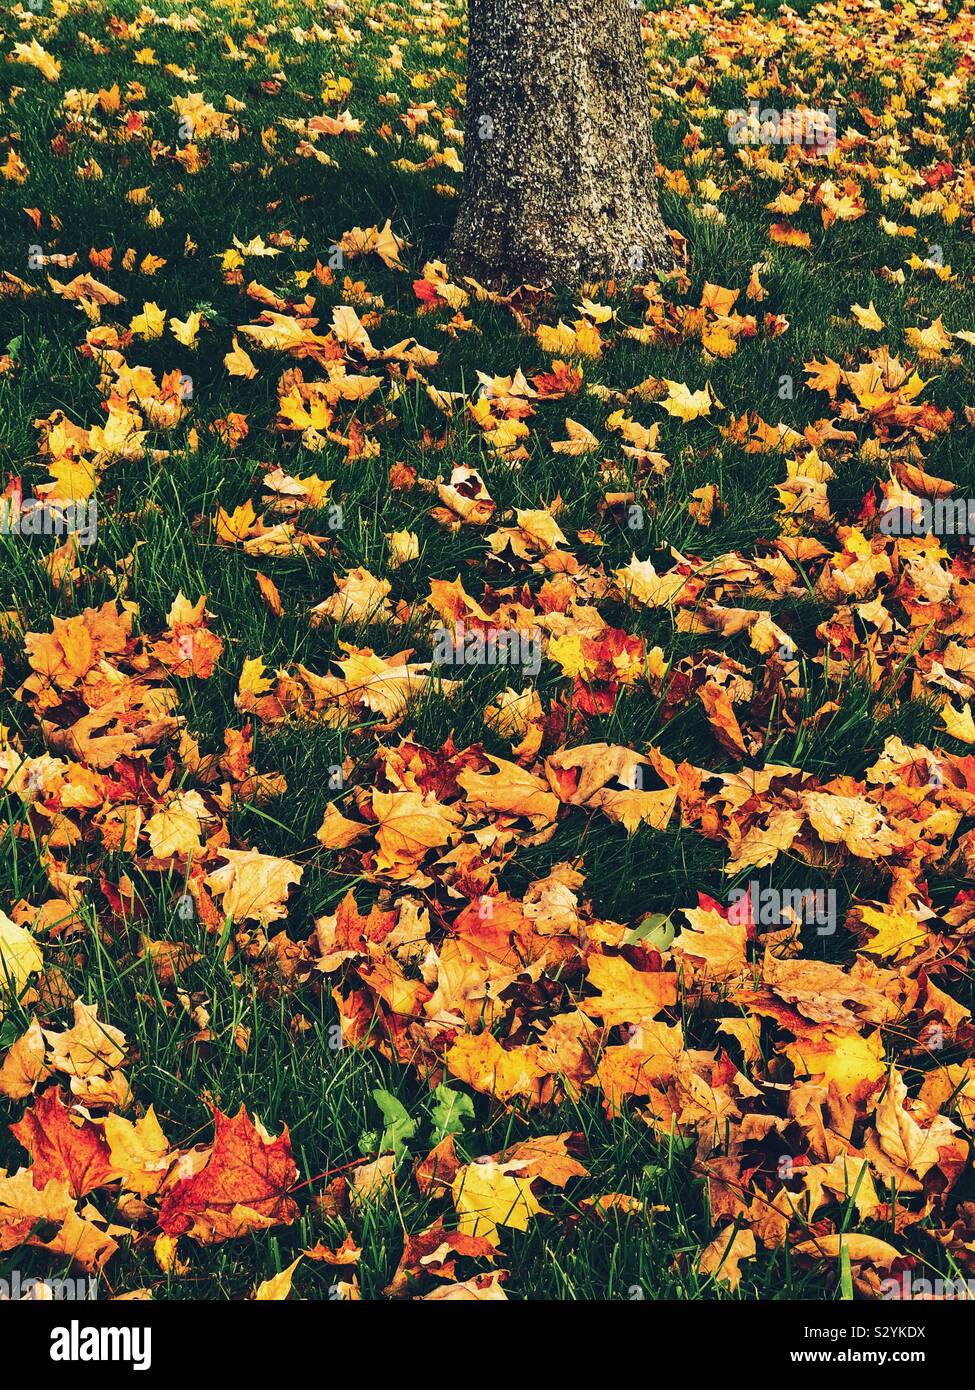 Autumn leaves on the ground with one tree trunk in the background Stock Photo